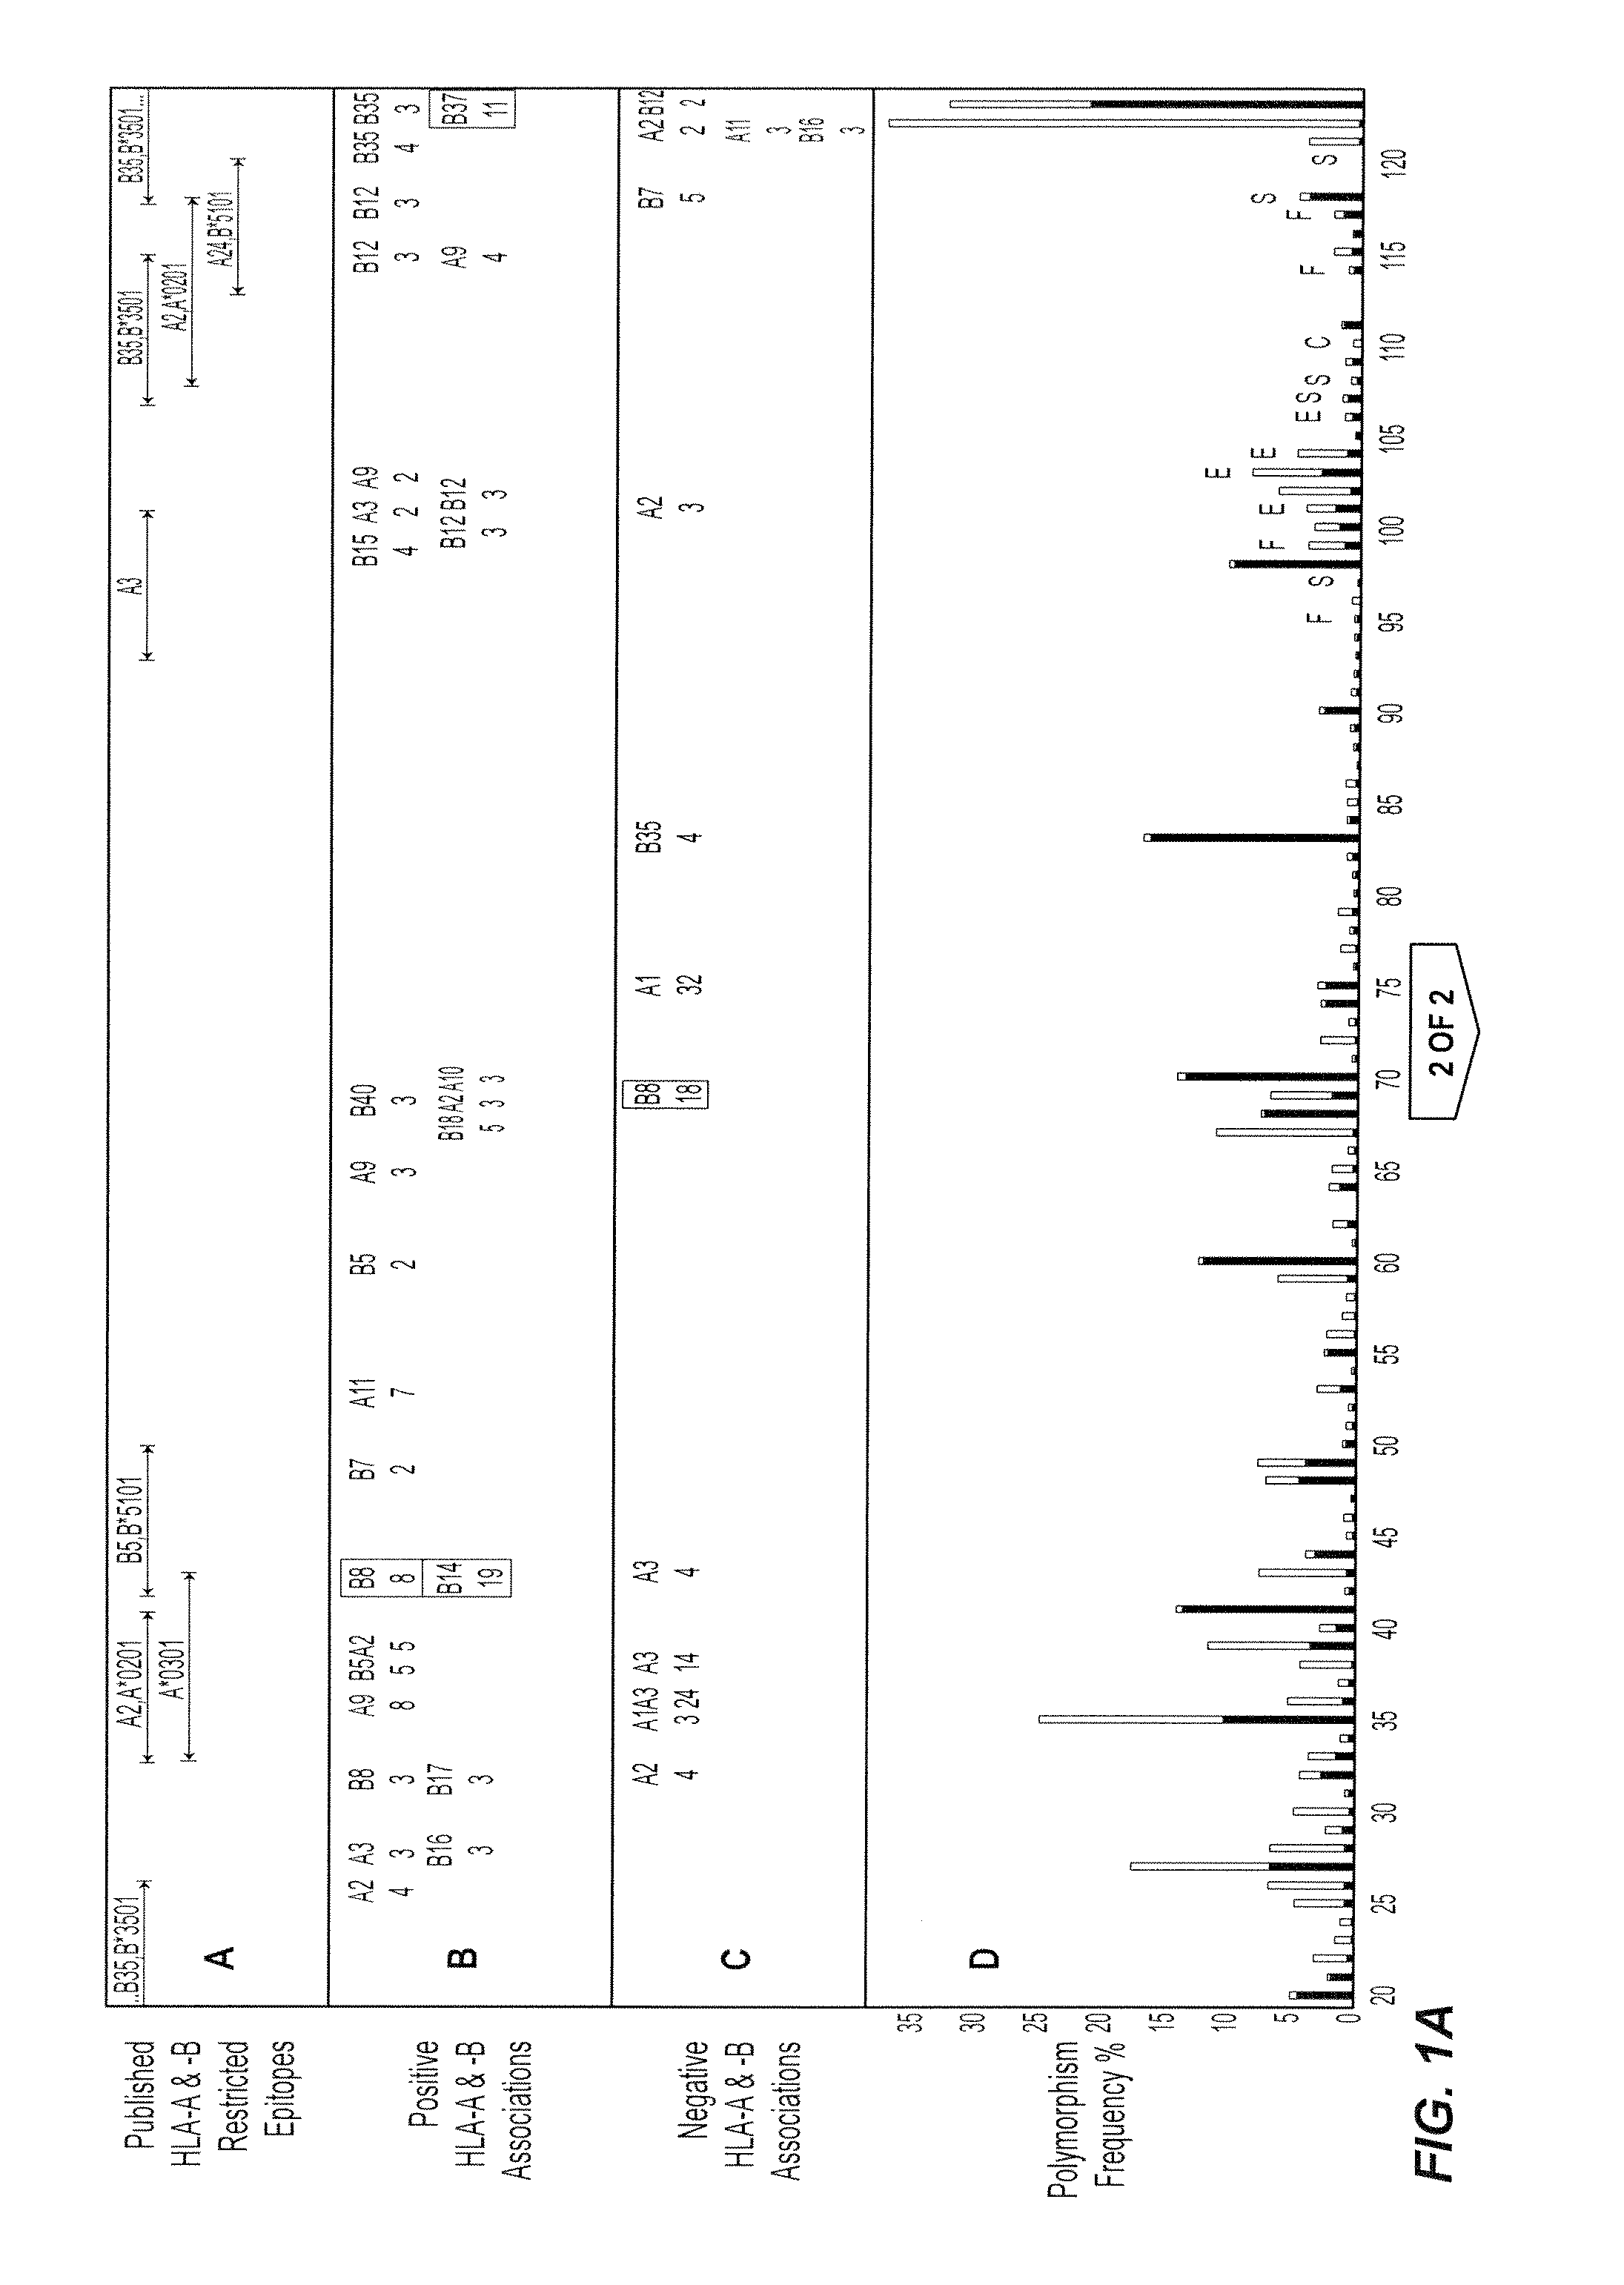 Method for Identification and Development of Therapeutic Agents